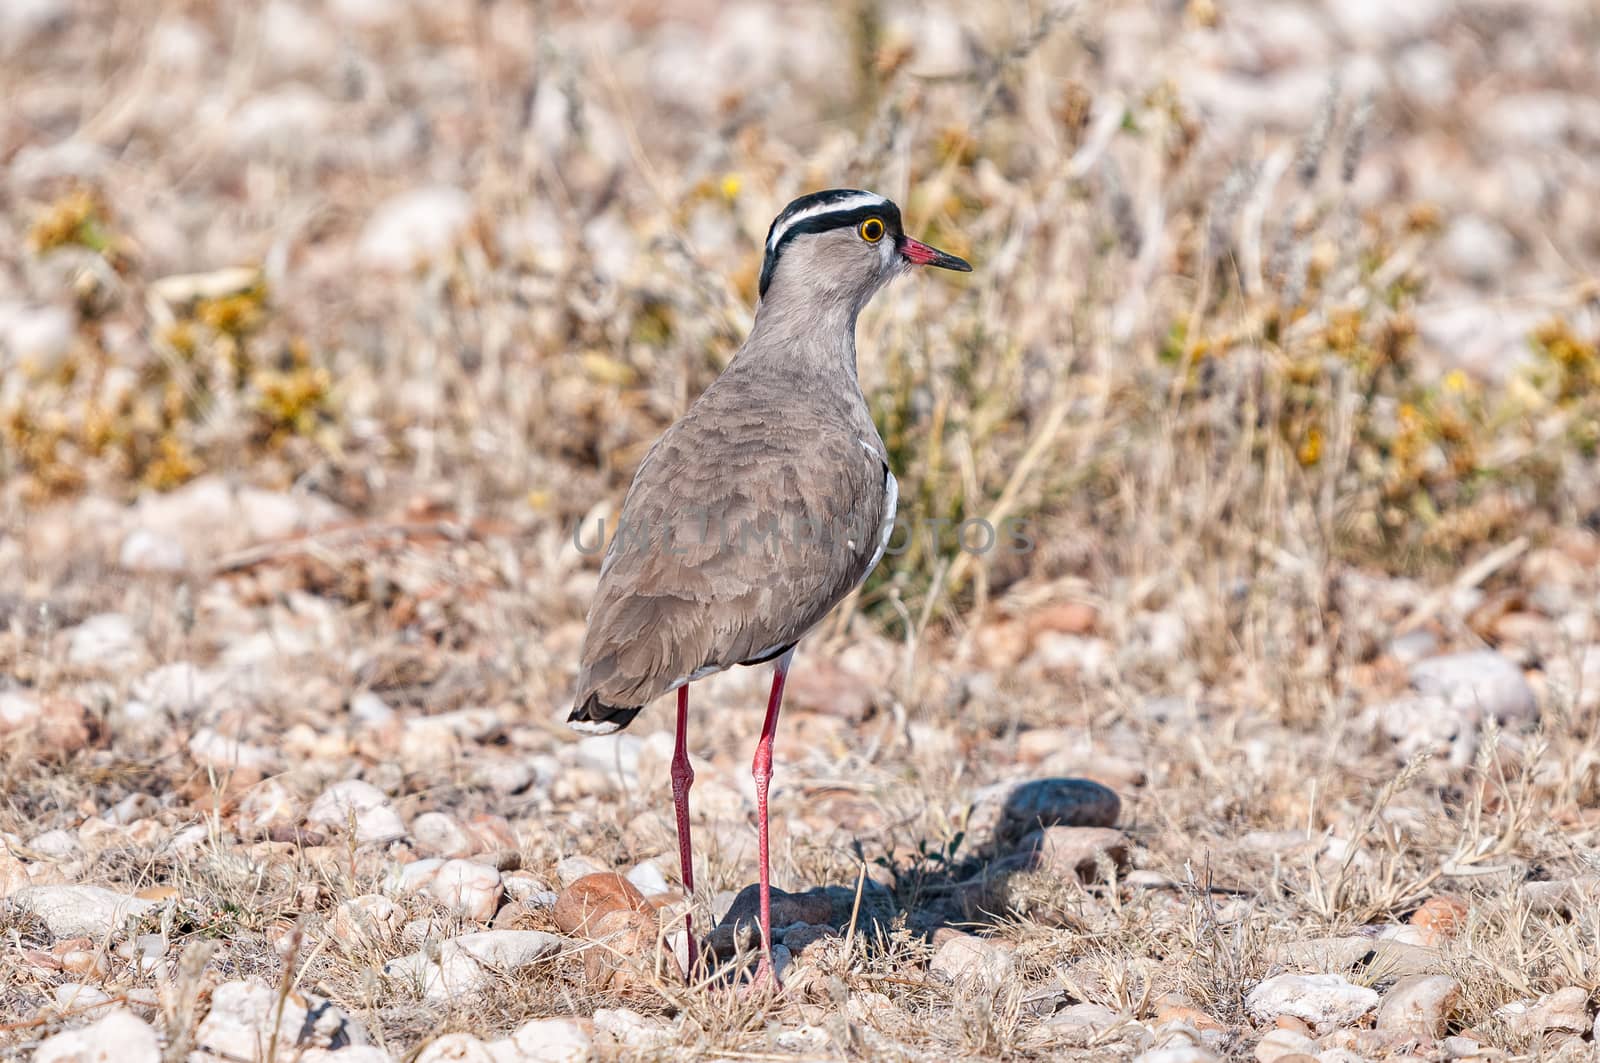 A crowned plover, Vanellus coronatus, on the ground